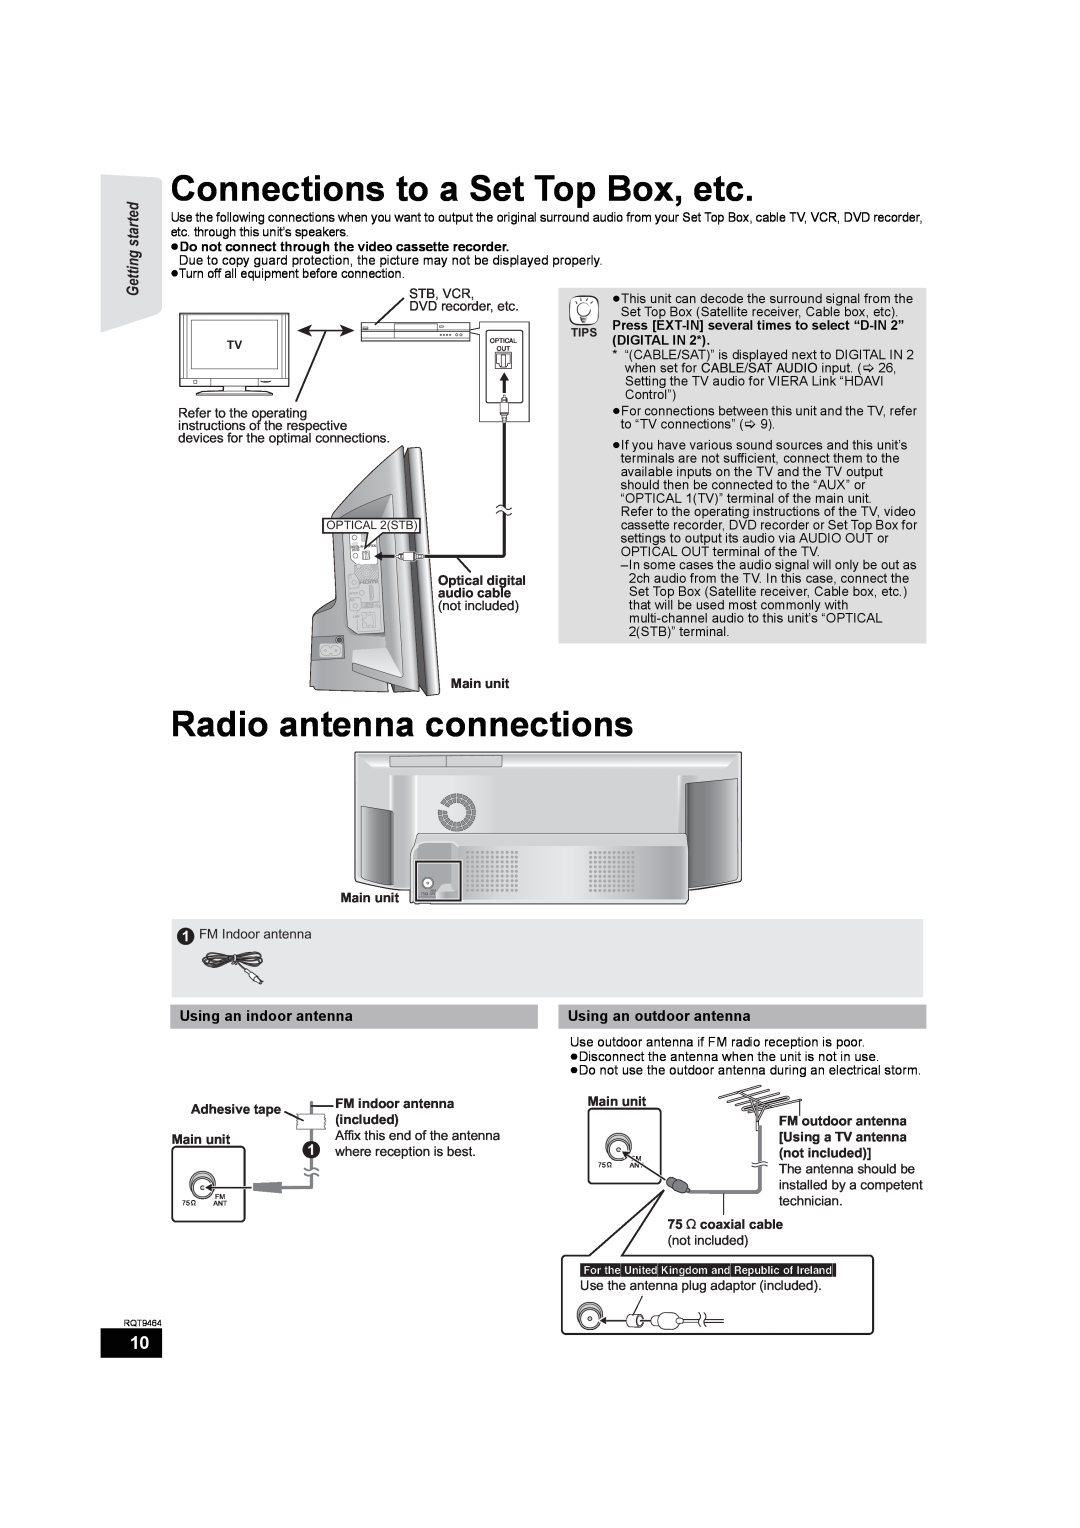 Panasonic SC-BTX70 Connections to a Set Top Box, etc, Radio antenna connections, Using an indoor antenna, Getting started 